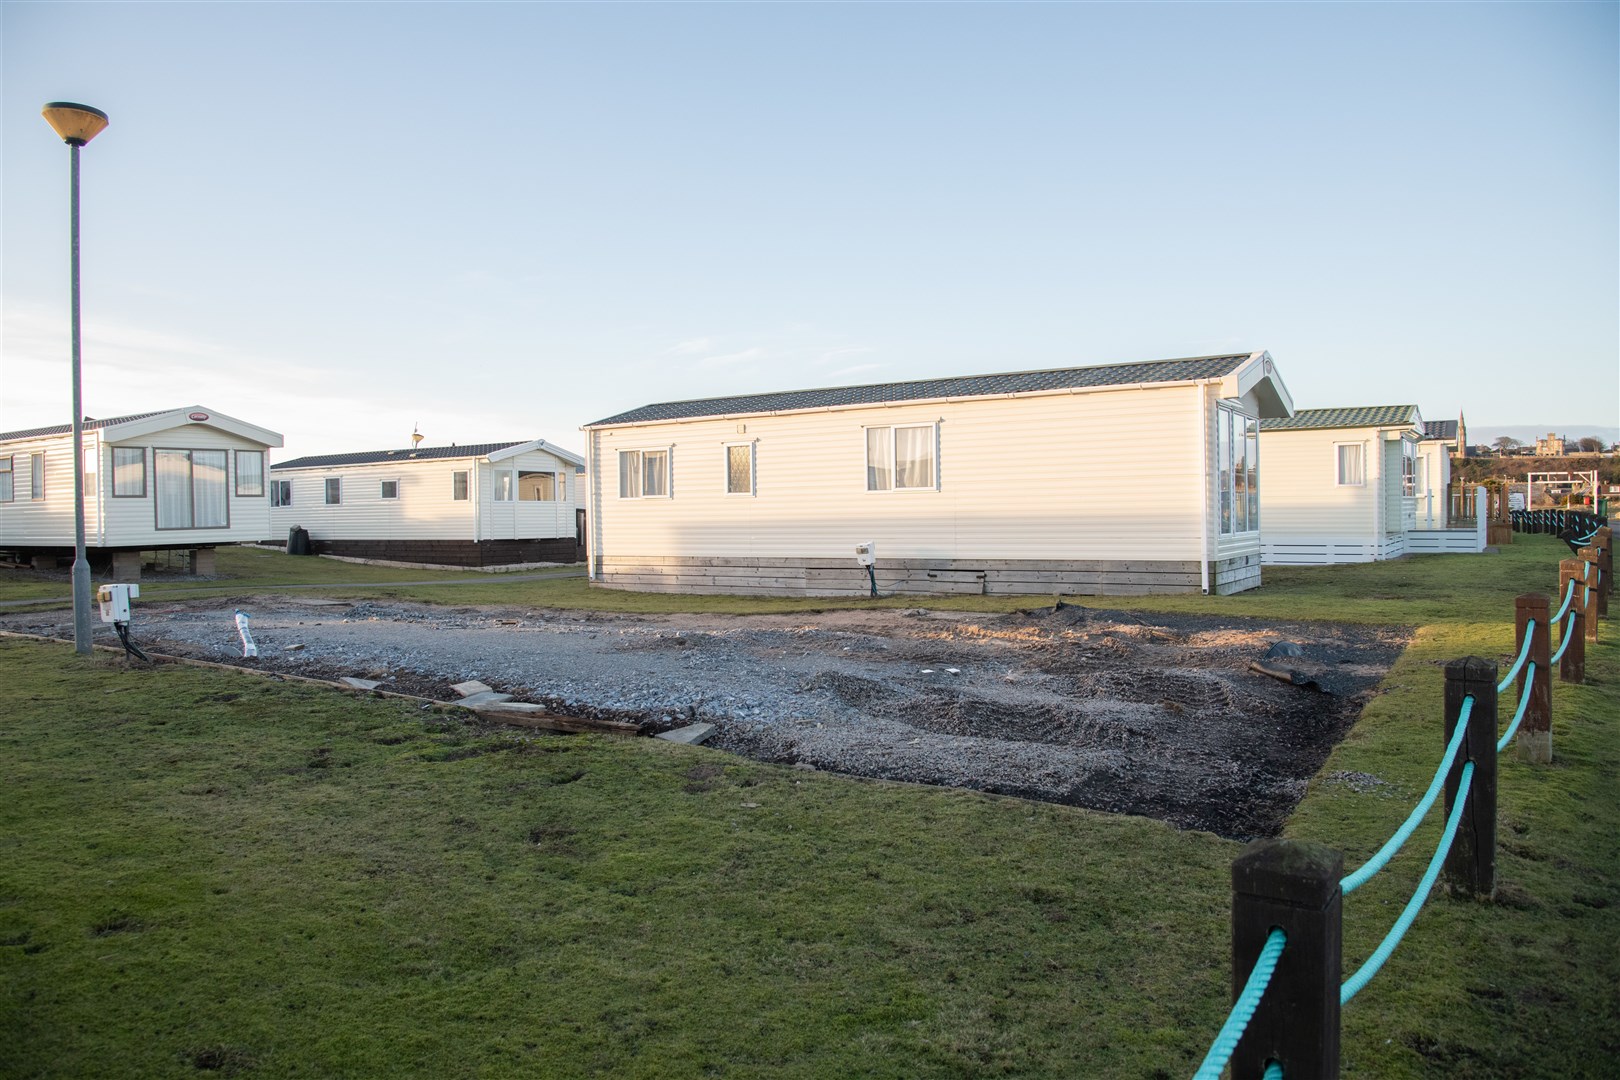 Owners complained the Lossiemouth Holiday Park was a 'bomb site'. Picture: Daniel Forsyth